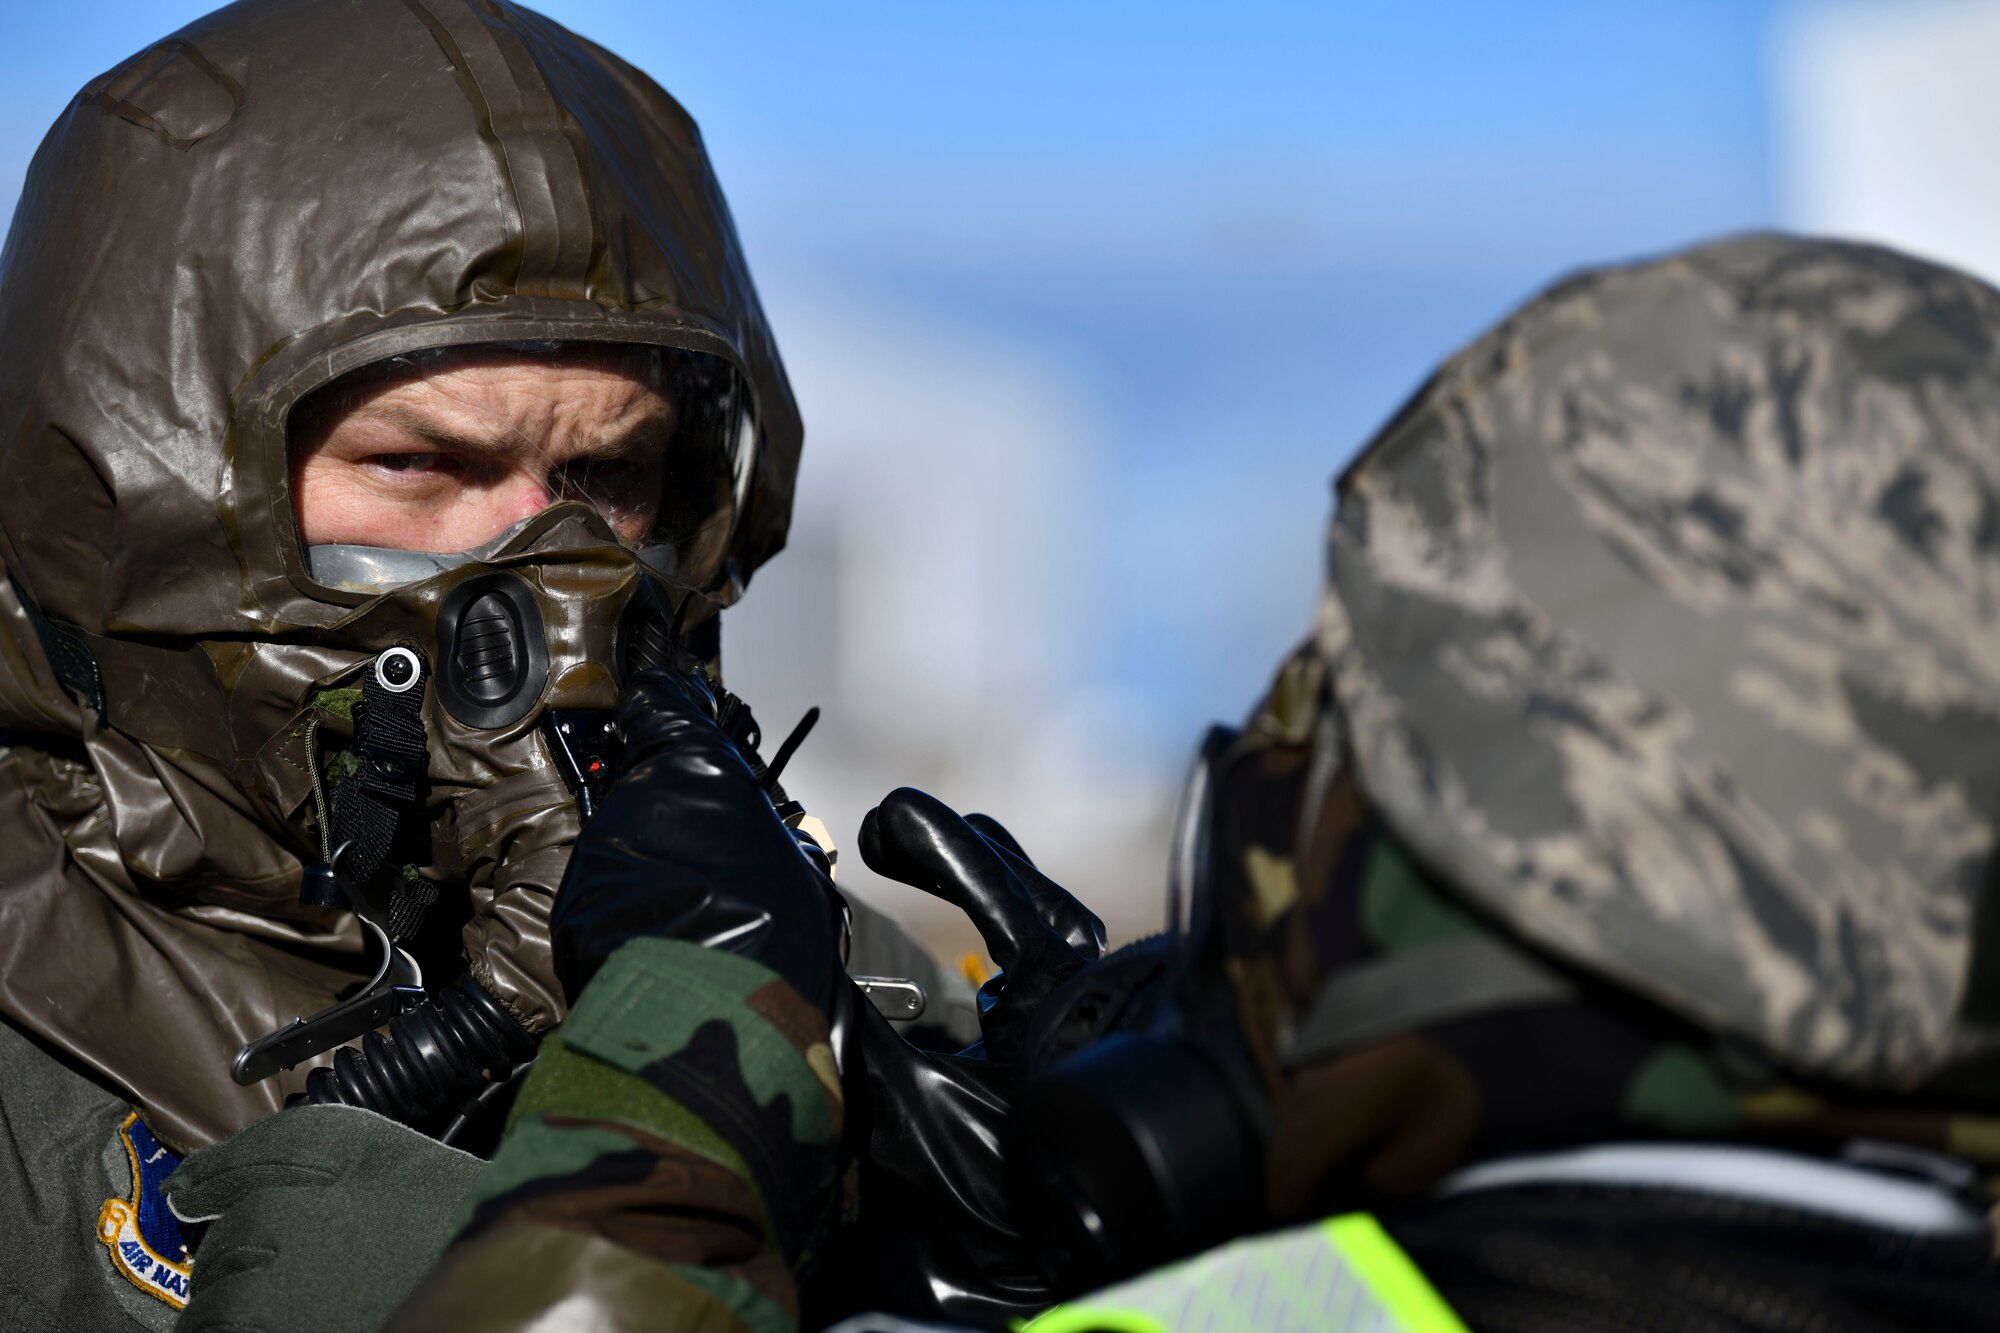 Capt. Justin Hill, a pilot assigned to the 183rd Airlift Squadron, receives an aircrew eye and respiratory protection system check as he goes through a simulated decontamination line during a large-scale readiness exercise in Jackson, Mississippi, Jan. 28, 2022. The AERPS equipment consists of a rubber mask, multiple layers of boots and gloves, fan filter system and an audio and speaker system, which is uniquely designed for aircrew members working in contaminated environments. (U.S. Air National Guard photo by 1st Lt. Kiara Spann)